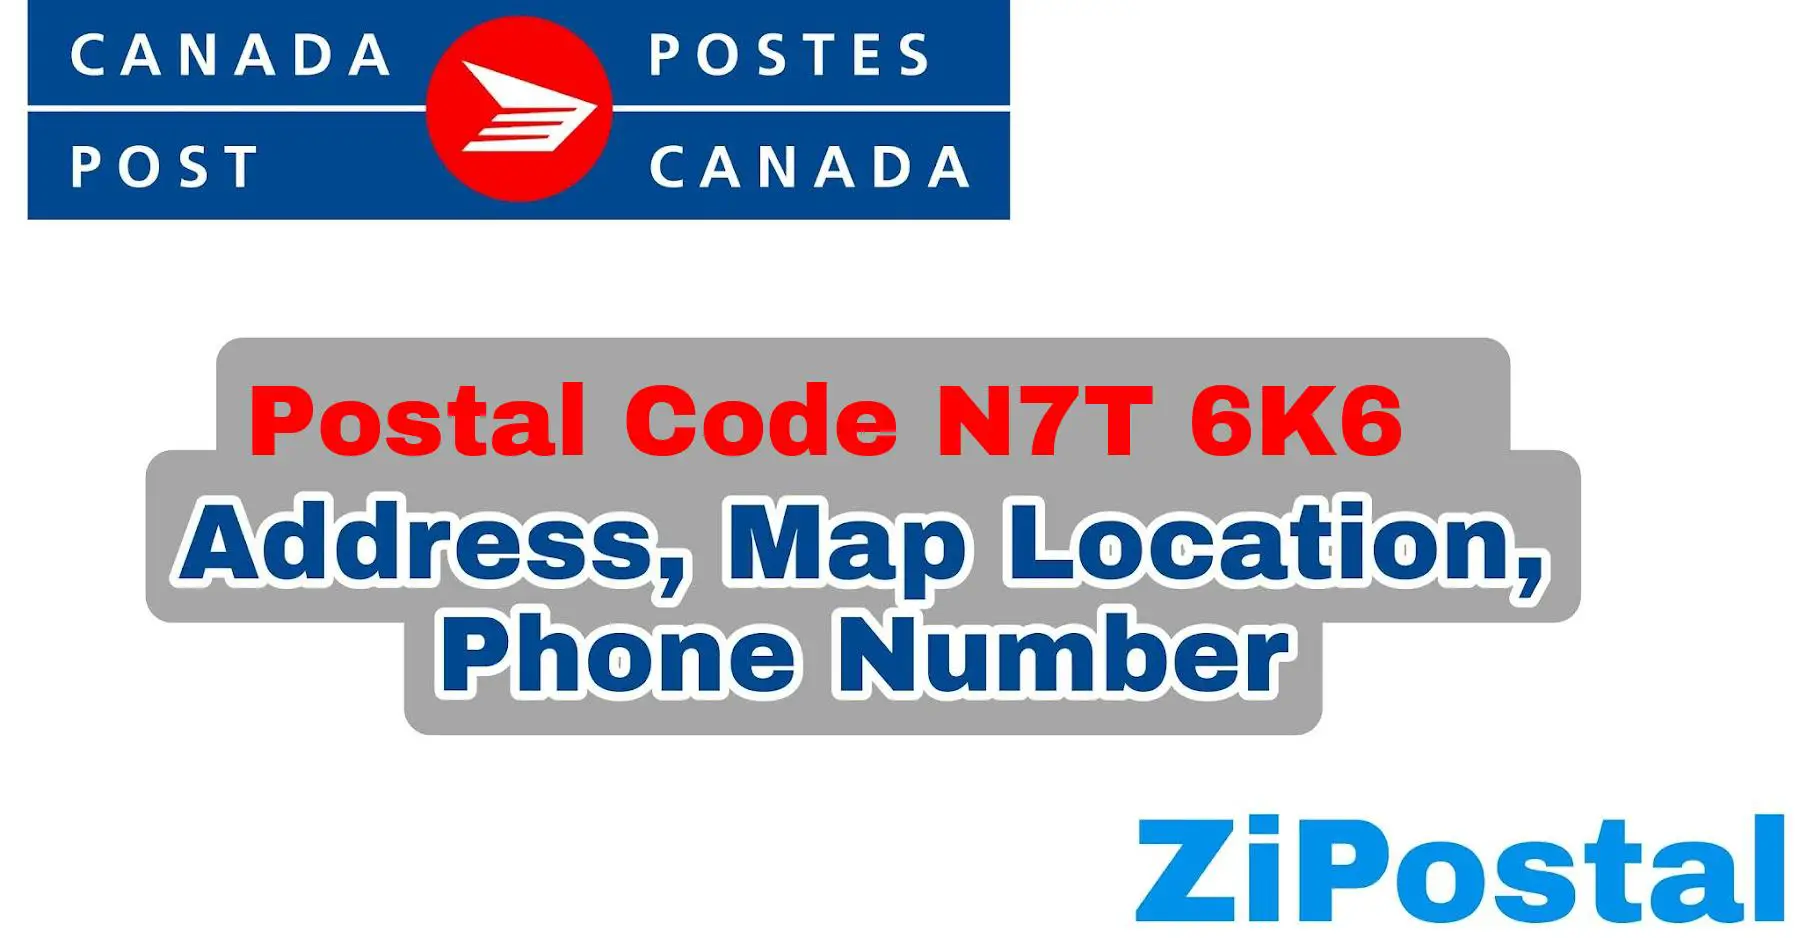 Postal Code N7T 6K6 Address Map Location and Phone Number